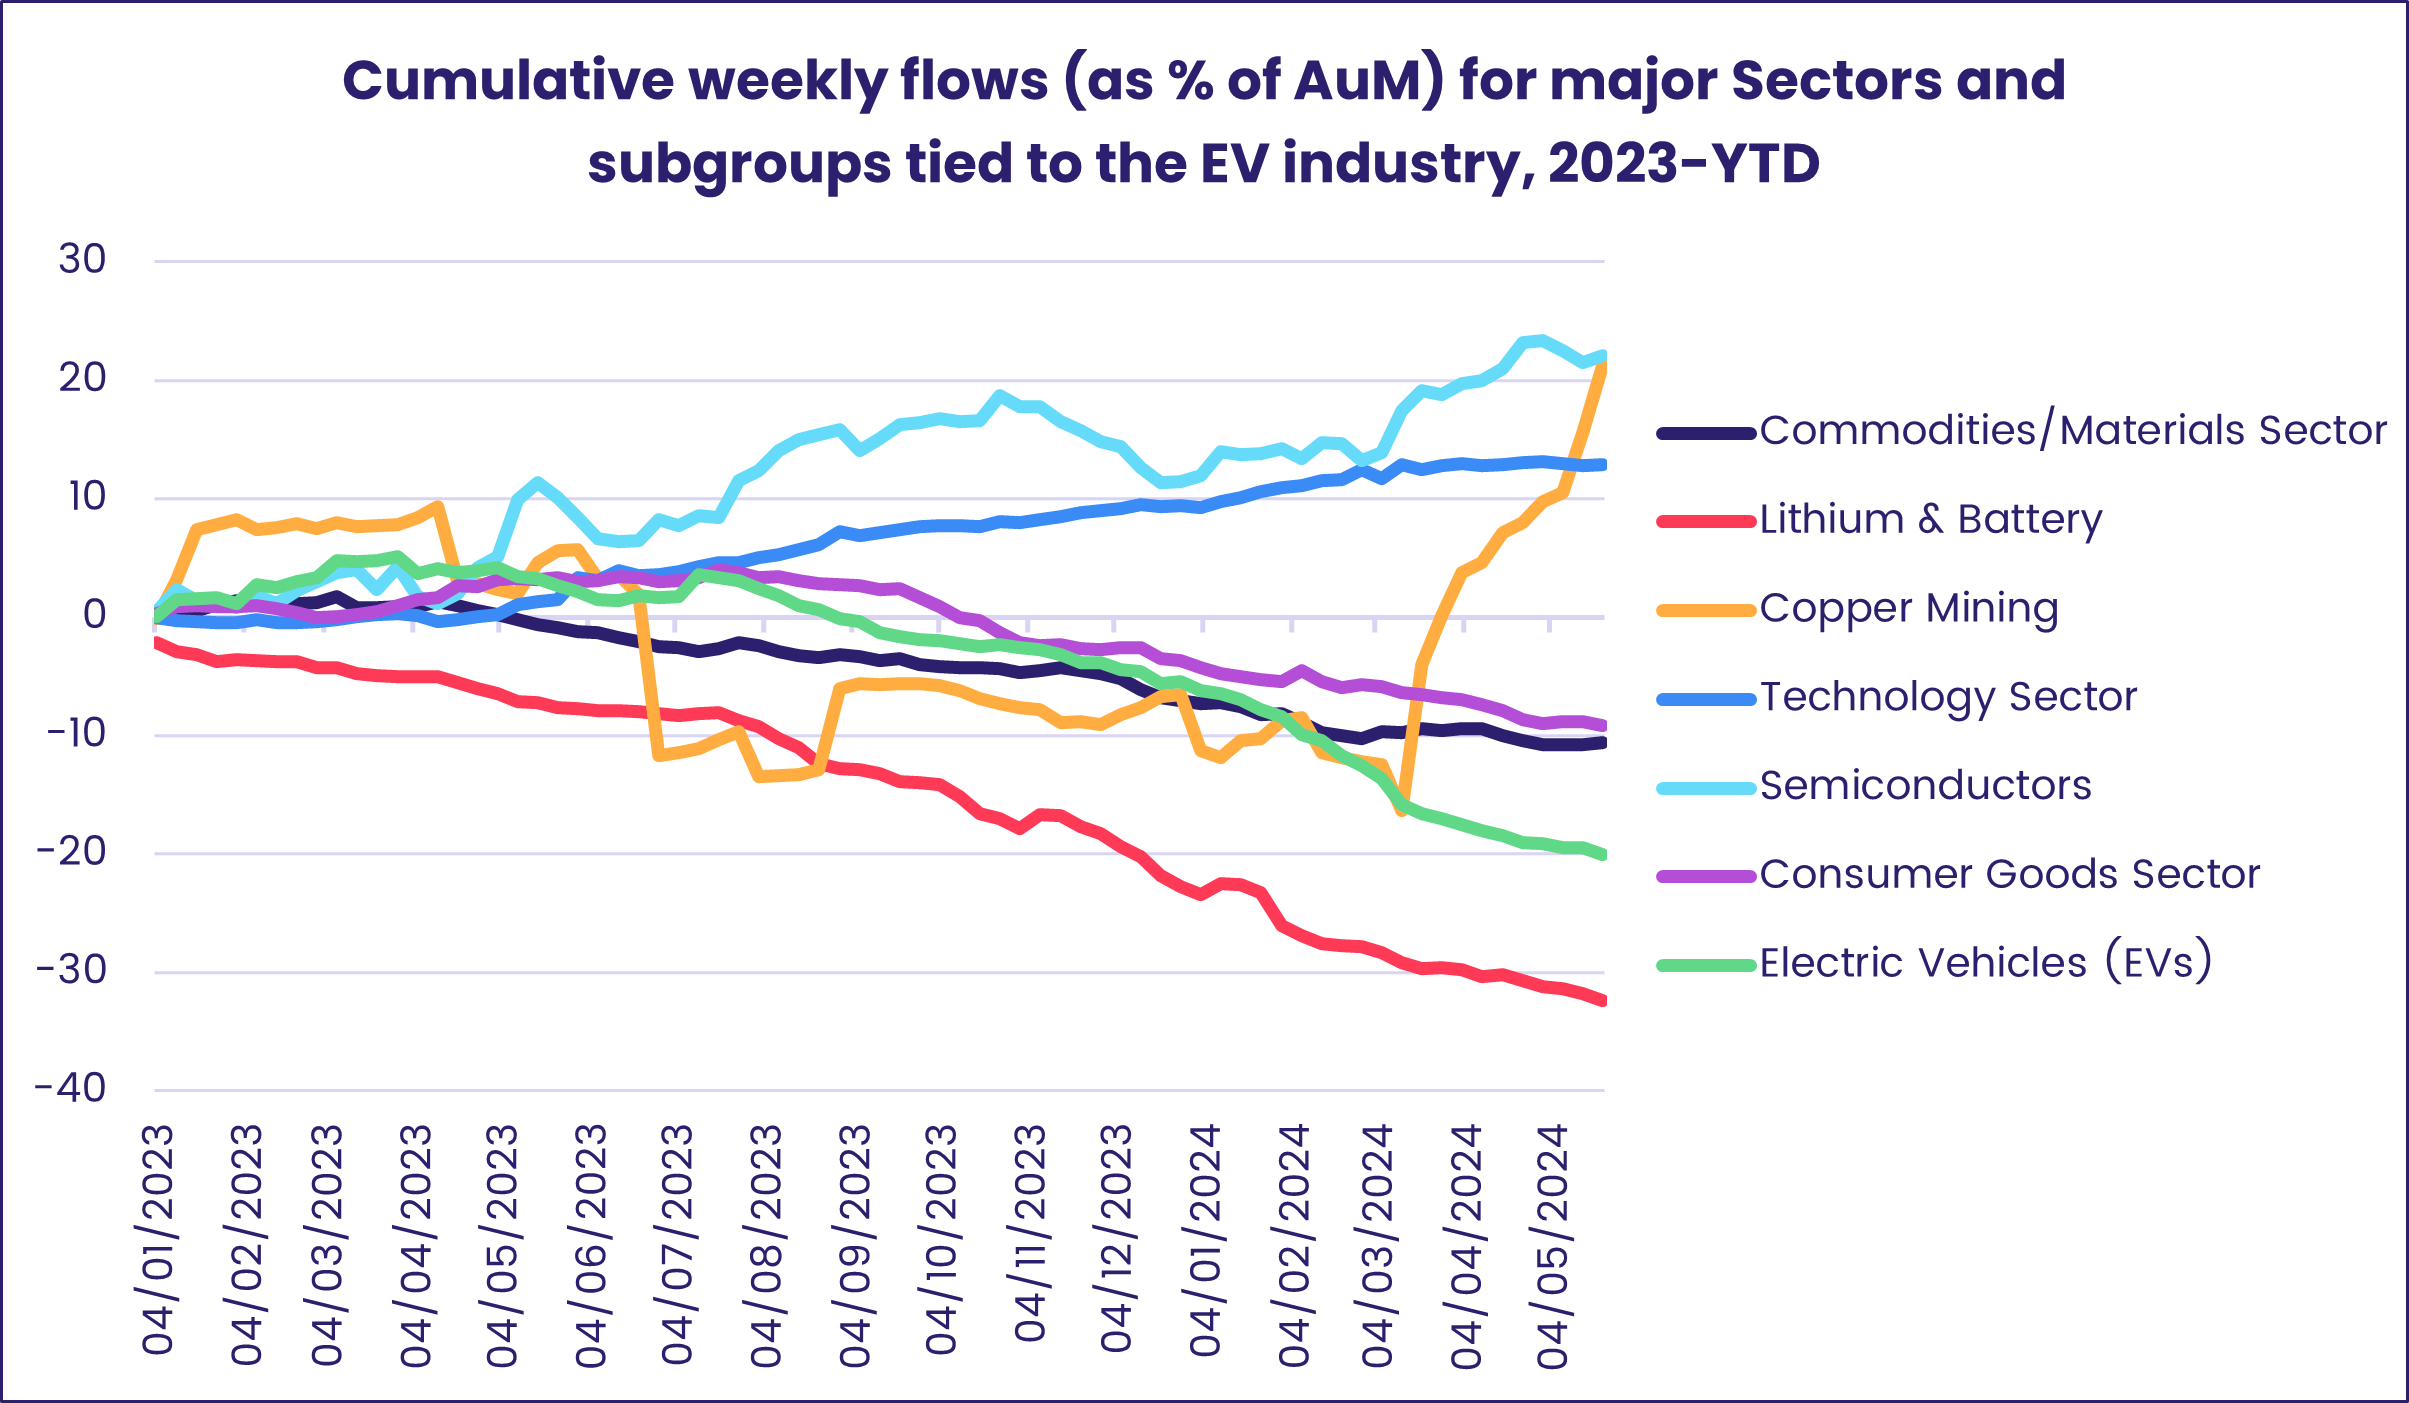 Chart representing 'Cumulative weekly flows (as % of AuM) for major Sectors and subgroups tied to the EV industry, 2023-YTD'